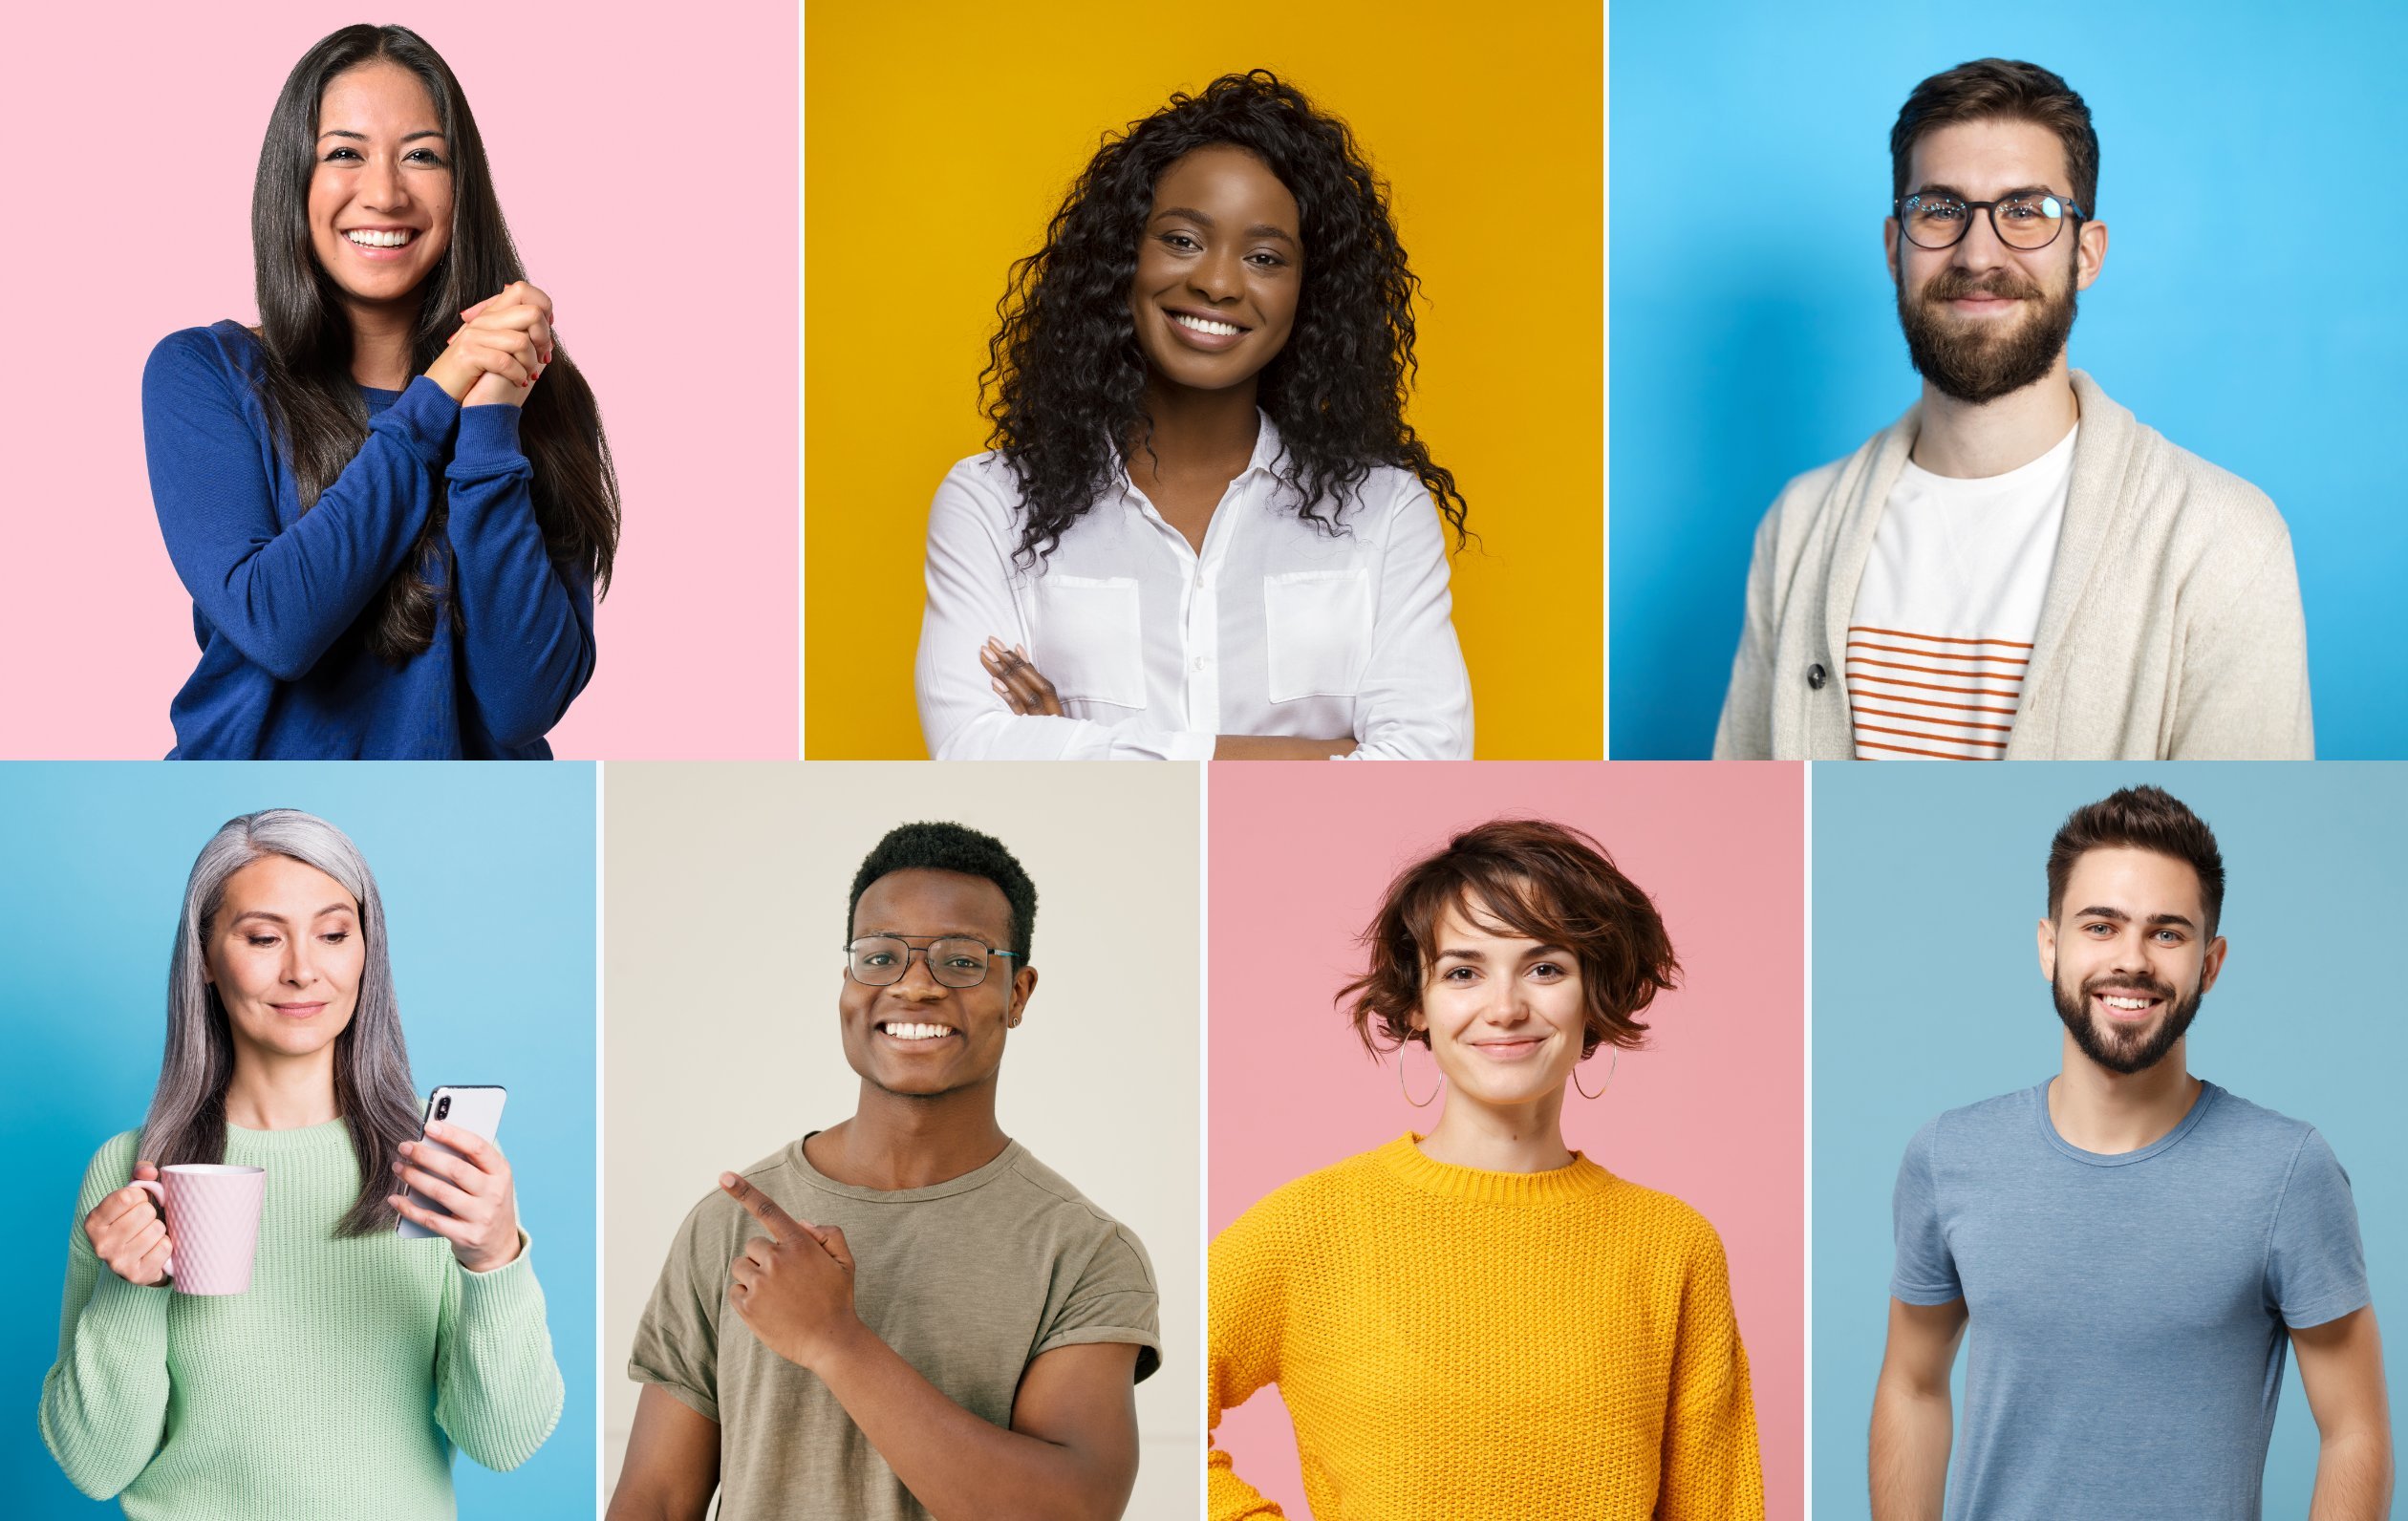 To generate results and drive conversions on your website, you need to understand your audience—here’s how to do it with consumer personas.